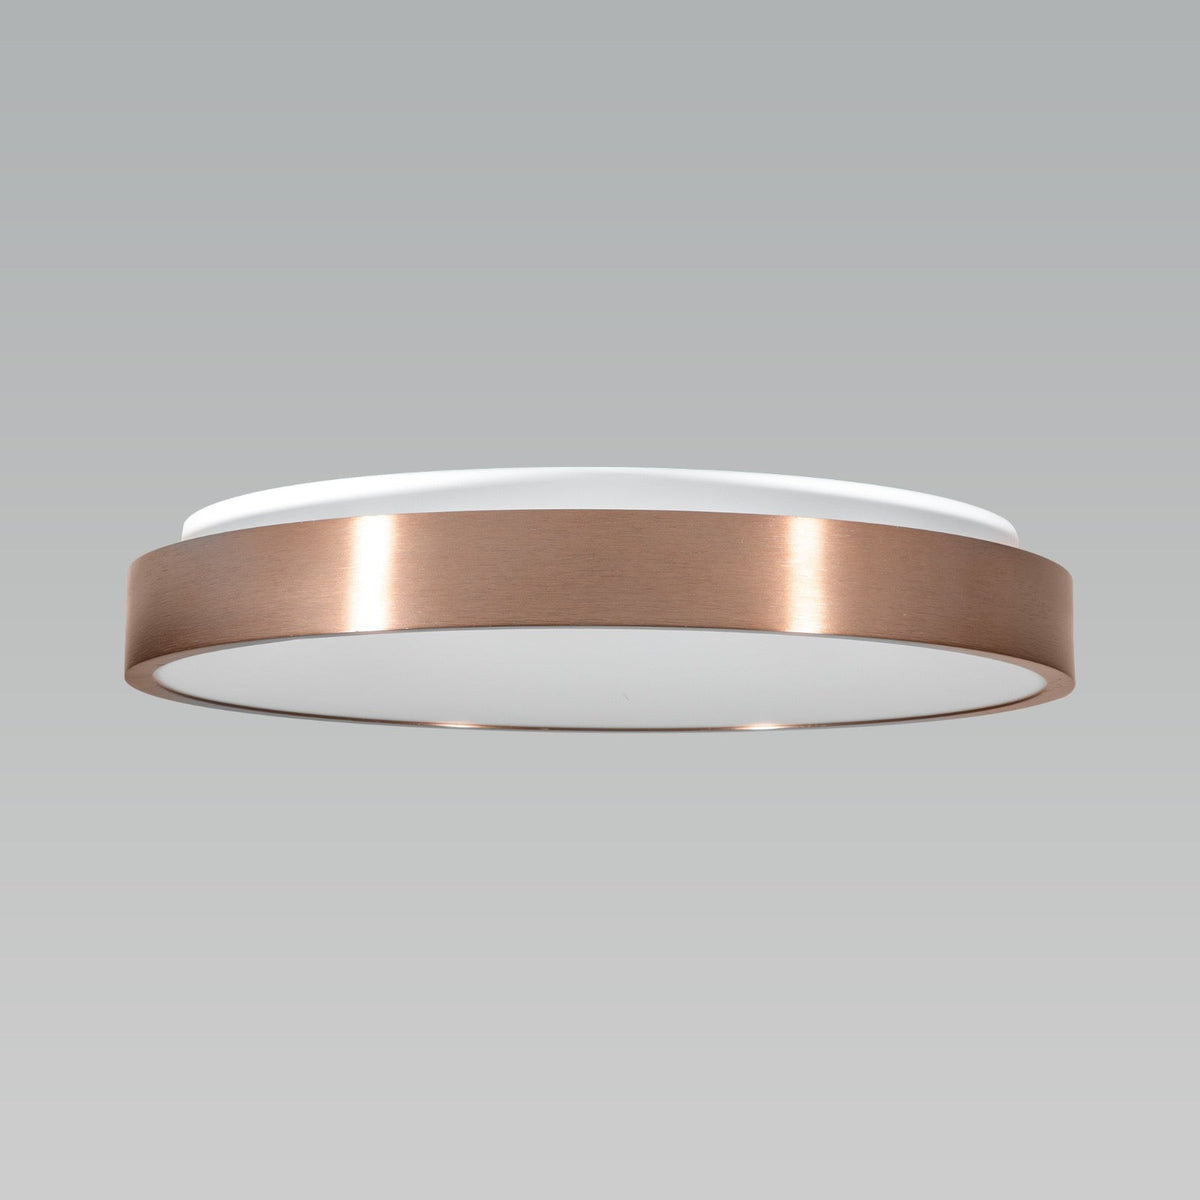 Buy Harmony Round (3 Colour) LED Chandelier-Ceiling Light online